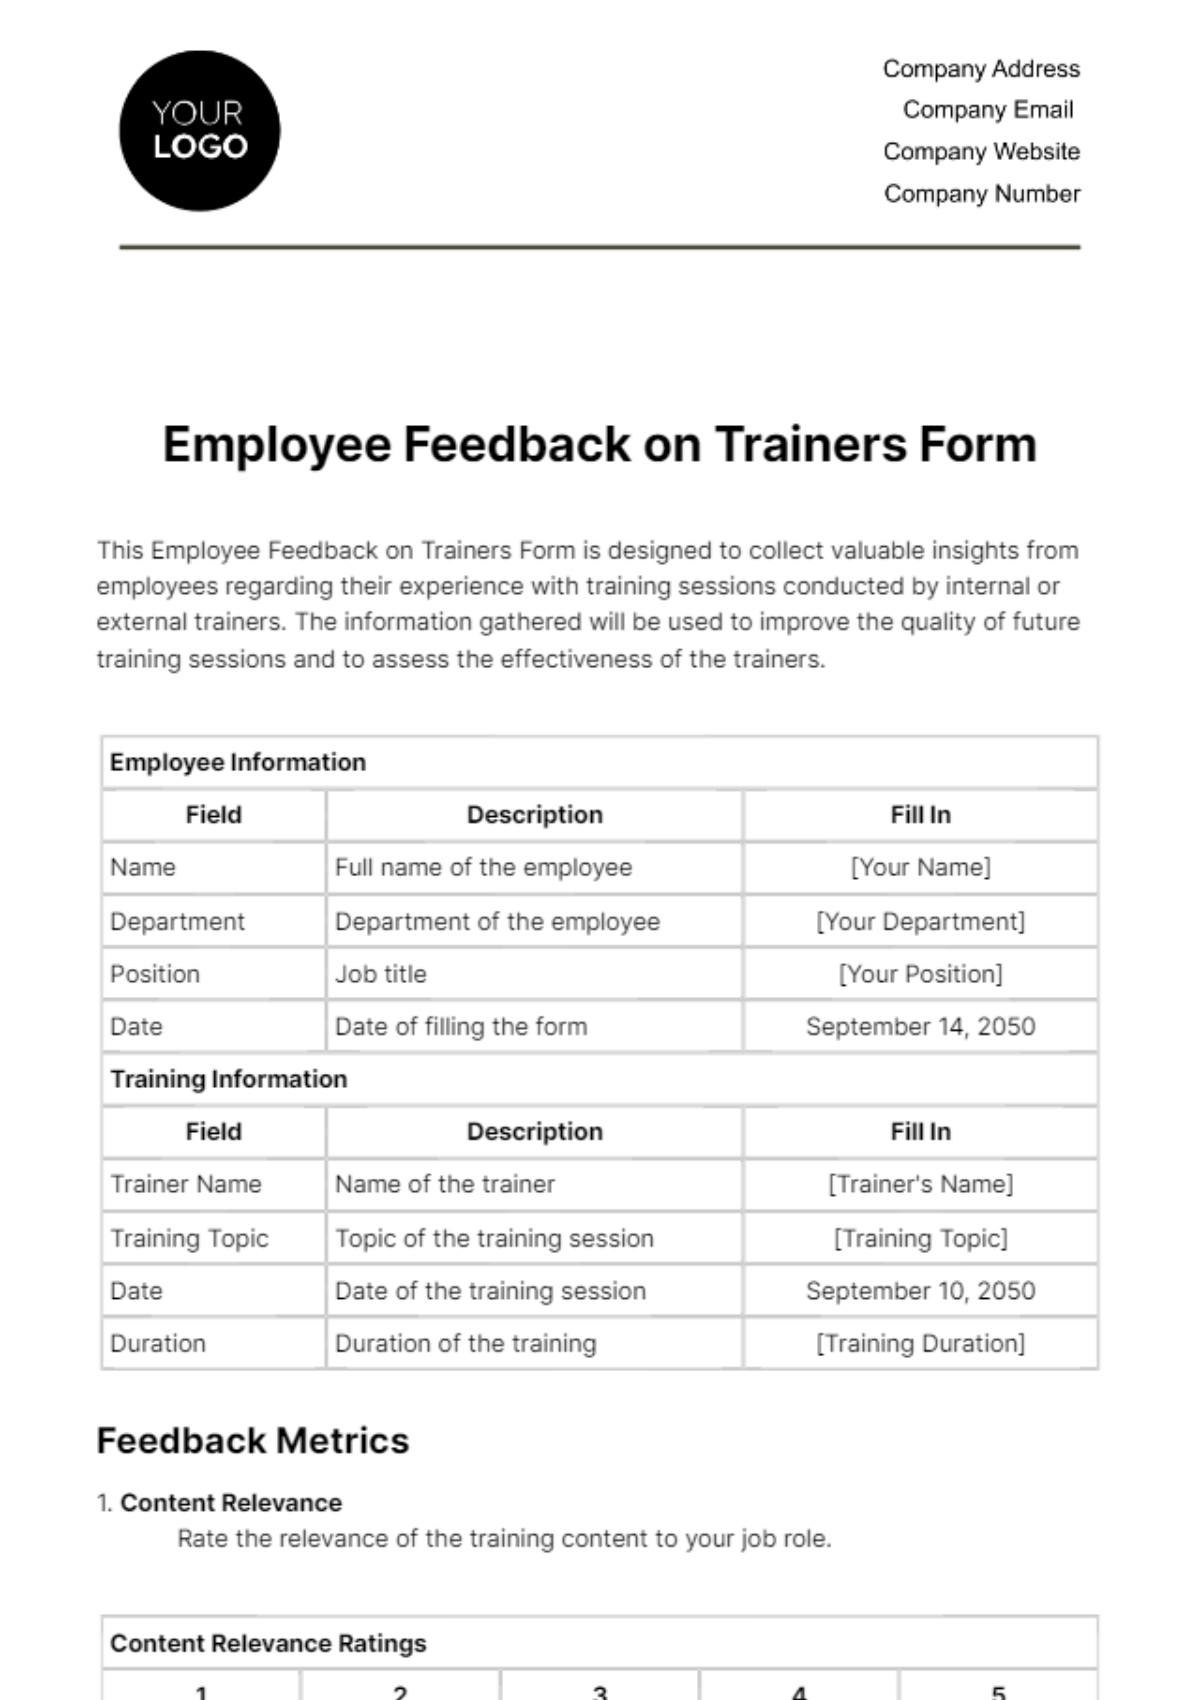 Free Employee Feedback on Trainers Form HR Template